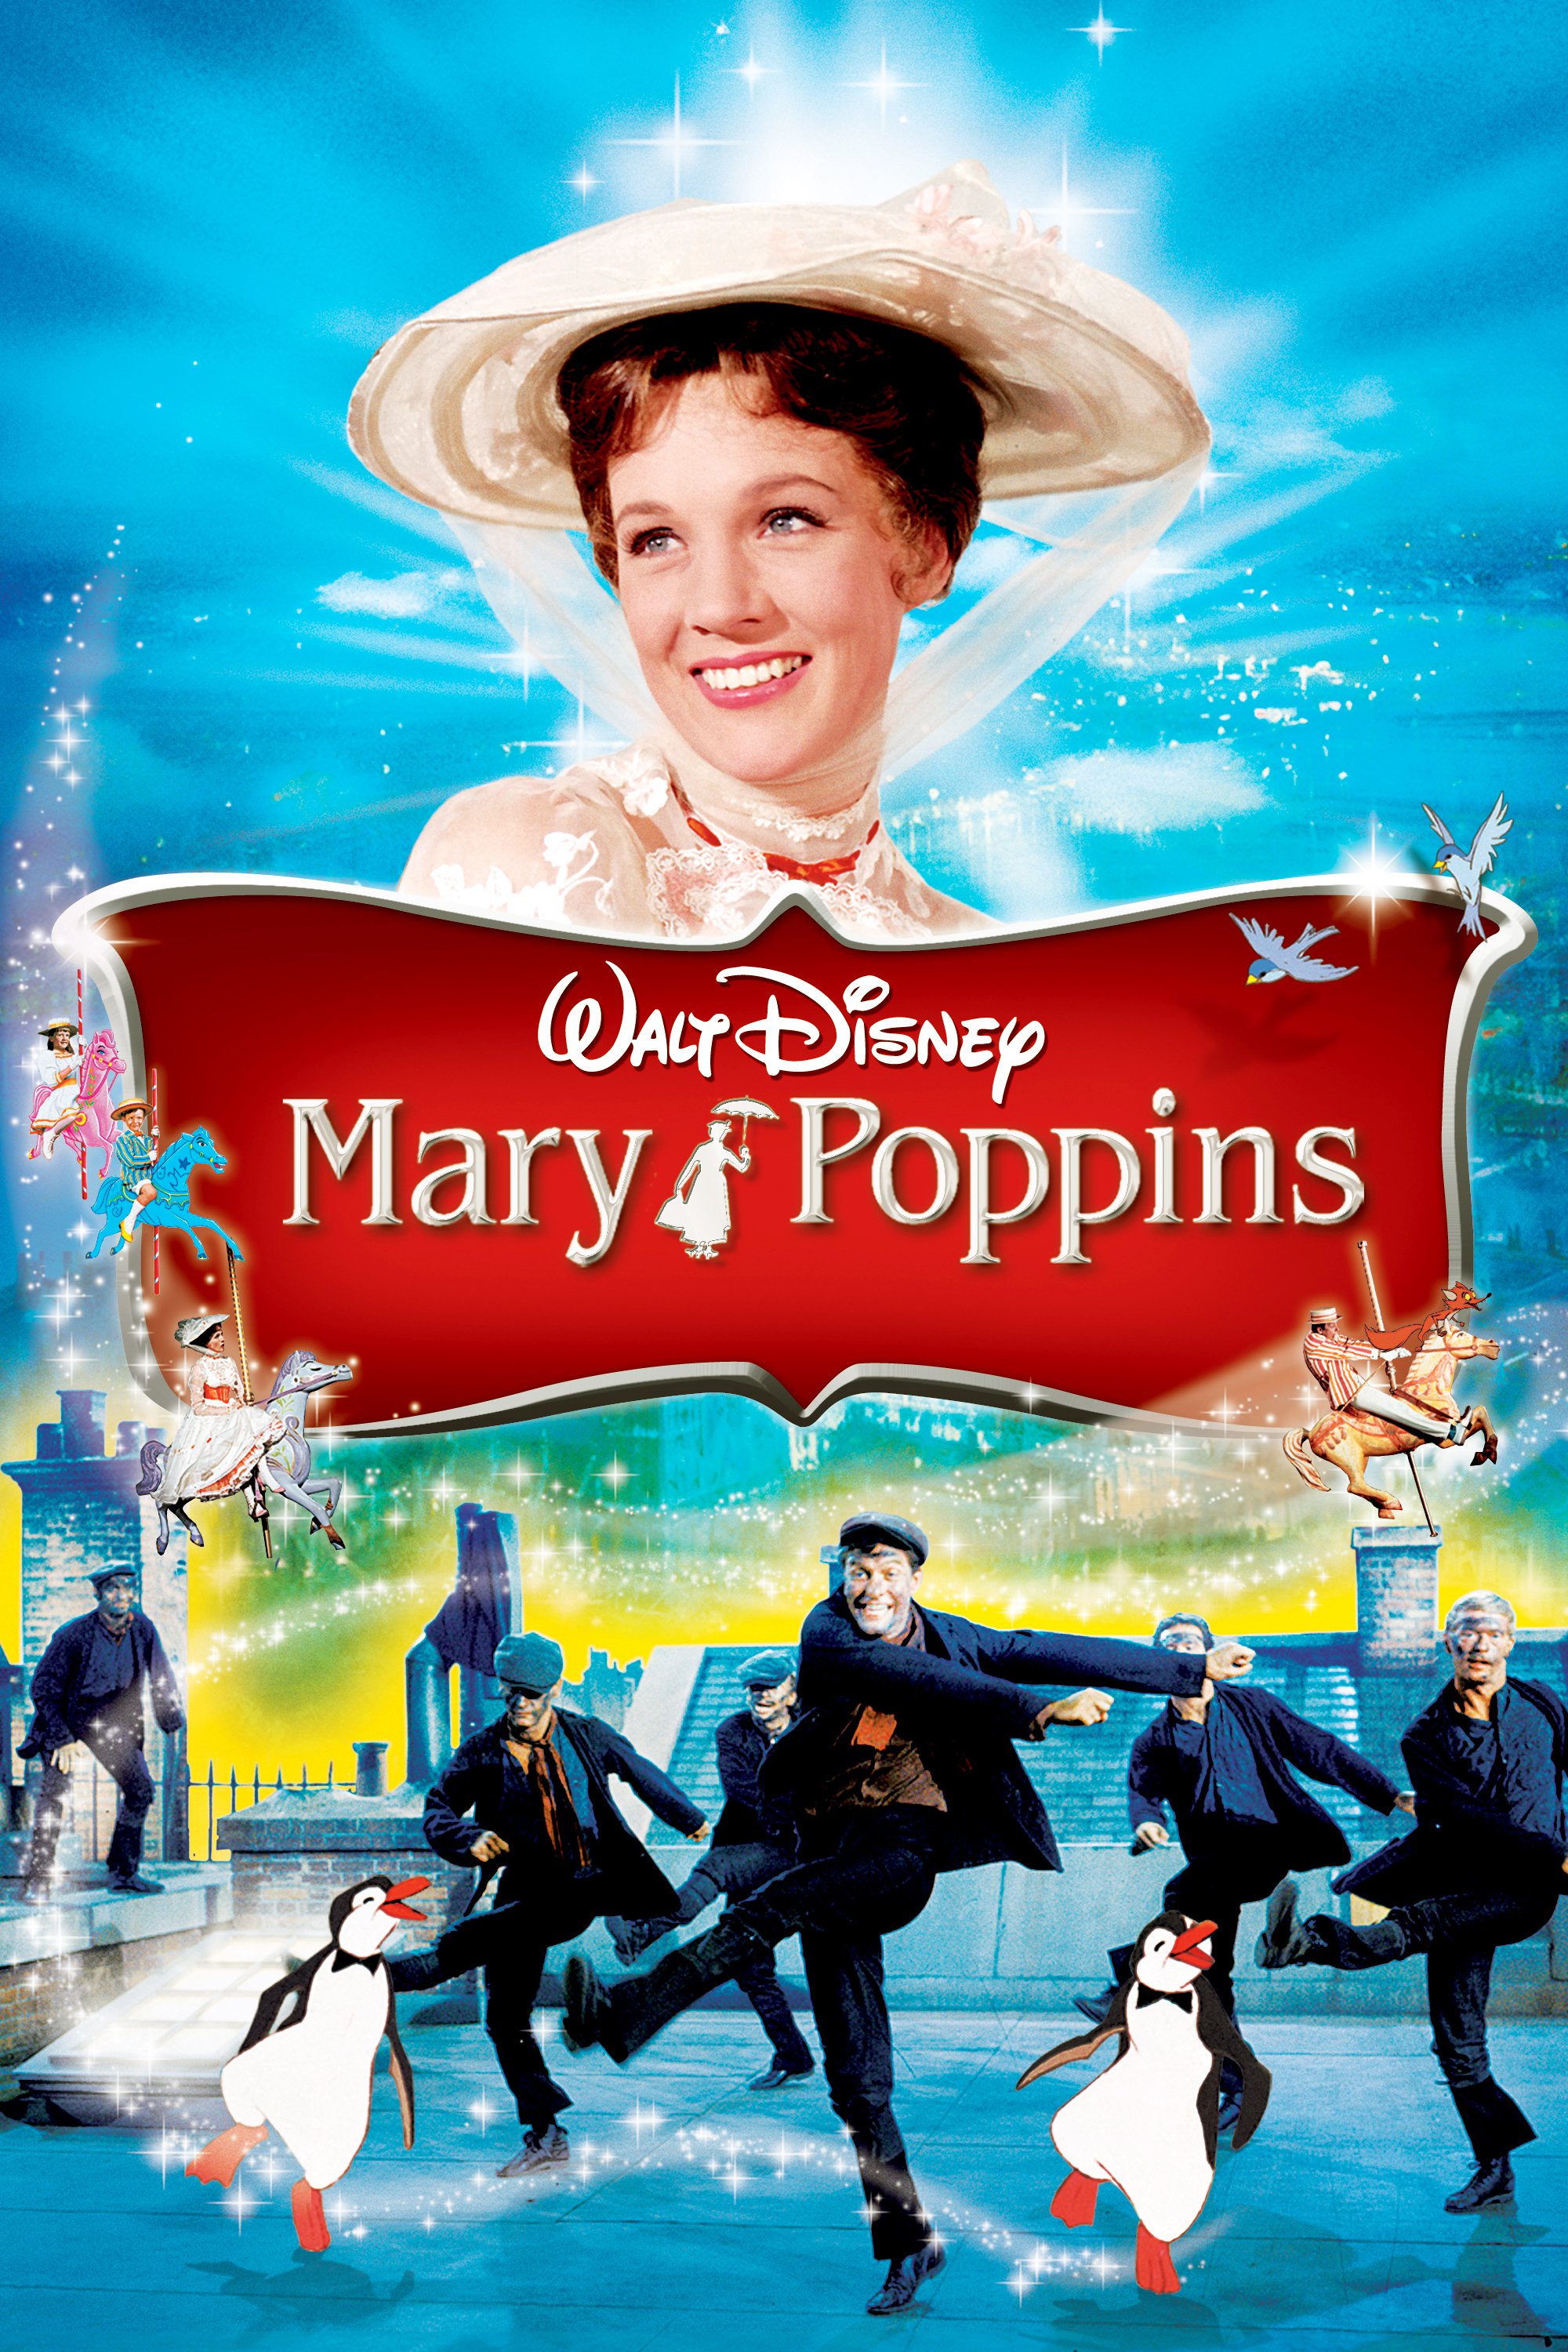 Poster for the movie "Mary Poppins"